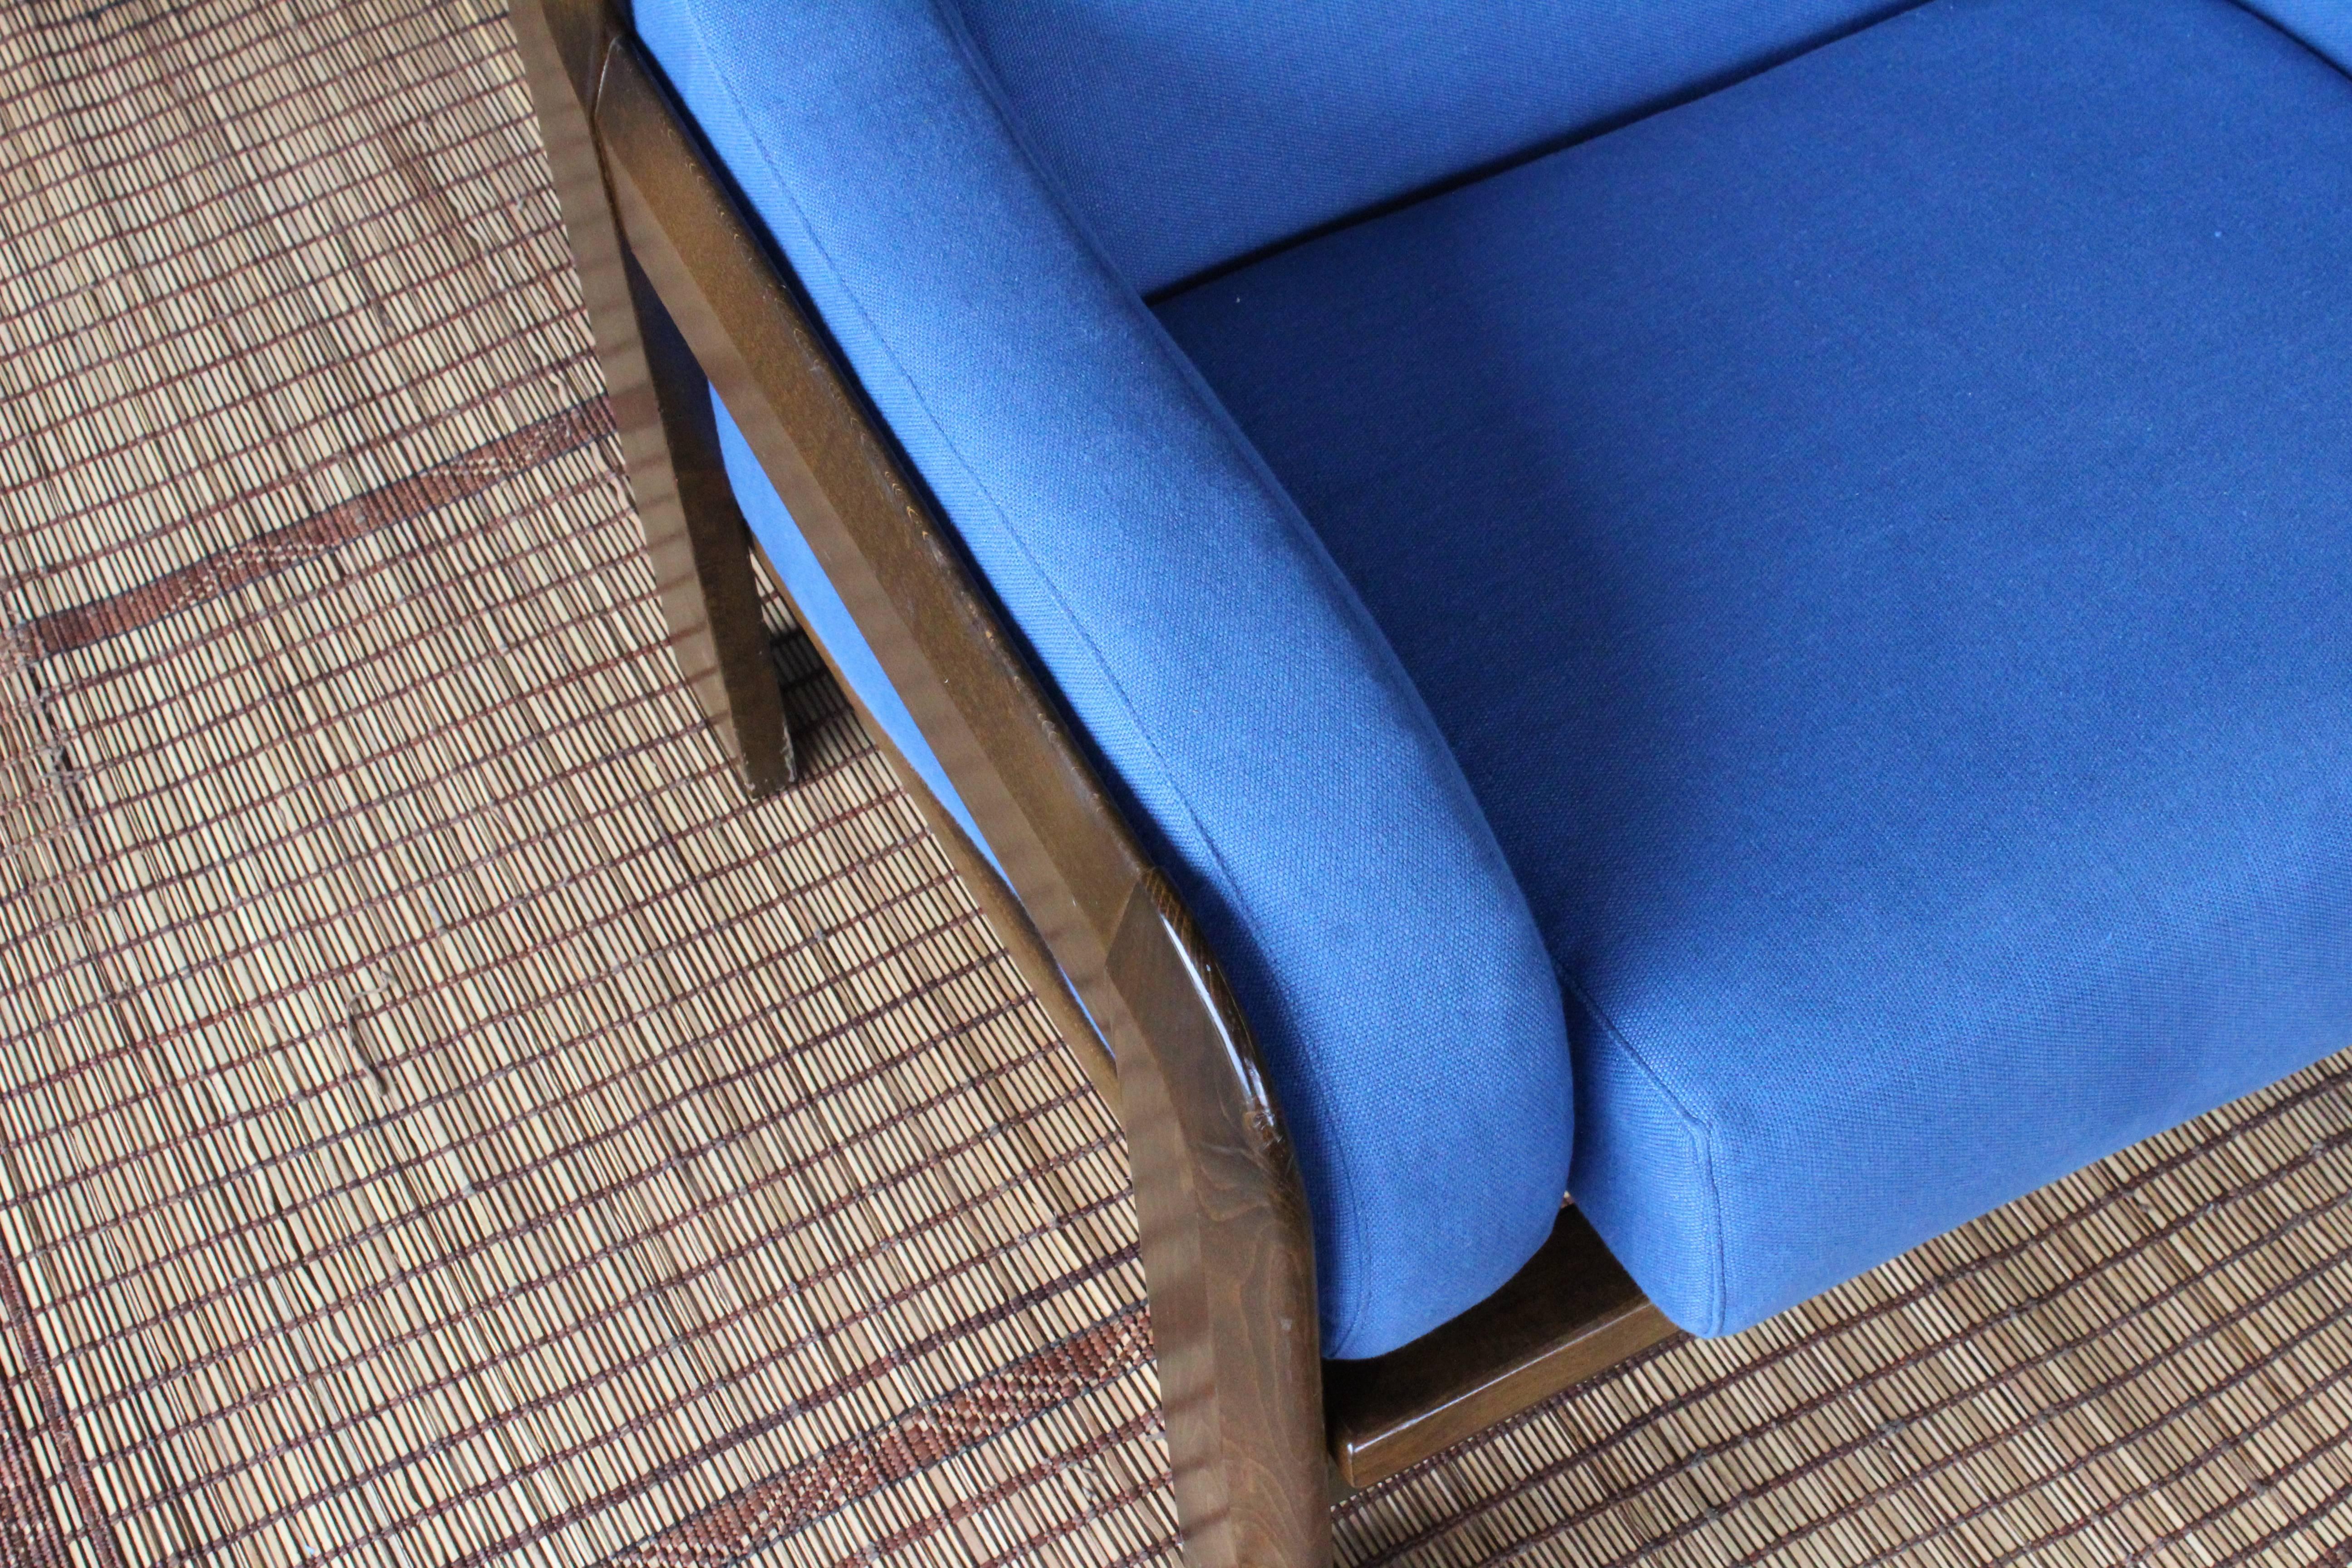 Pair of armchairs by Sillas Guilleumas crafted in solid walnut, Spain, 1970s. Loose cushions with new blue linen upholstery. The pair are in good condition with minor signs of wear.